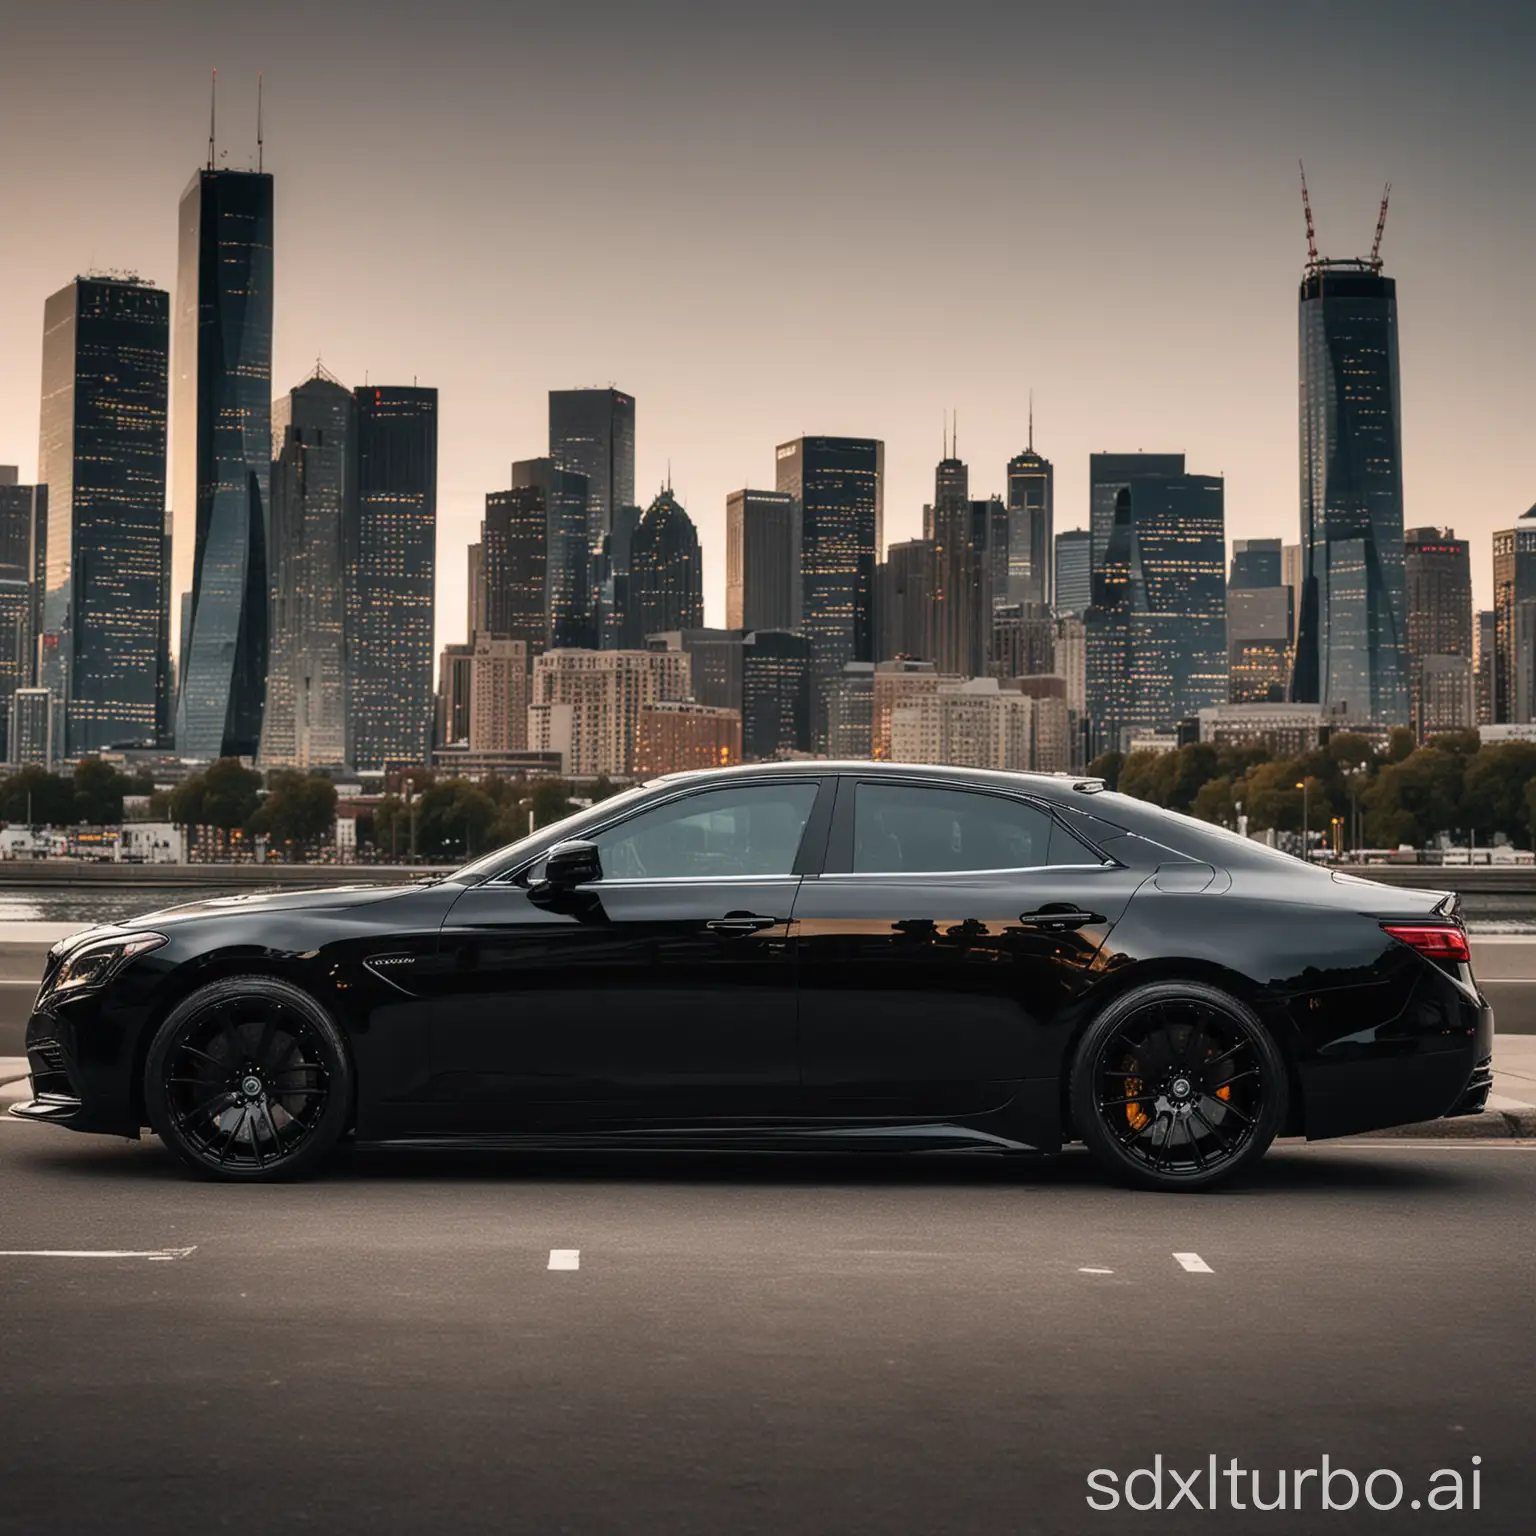 A black car parked in front of a city skyline. The car is a luxury model with a shiny paint job and tinted windows.